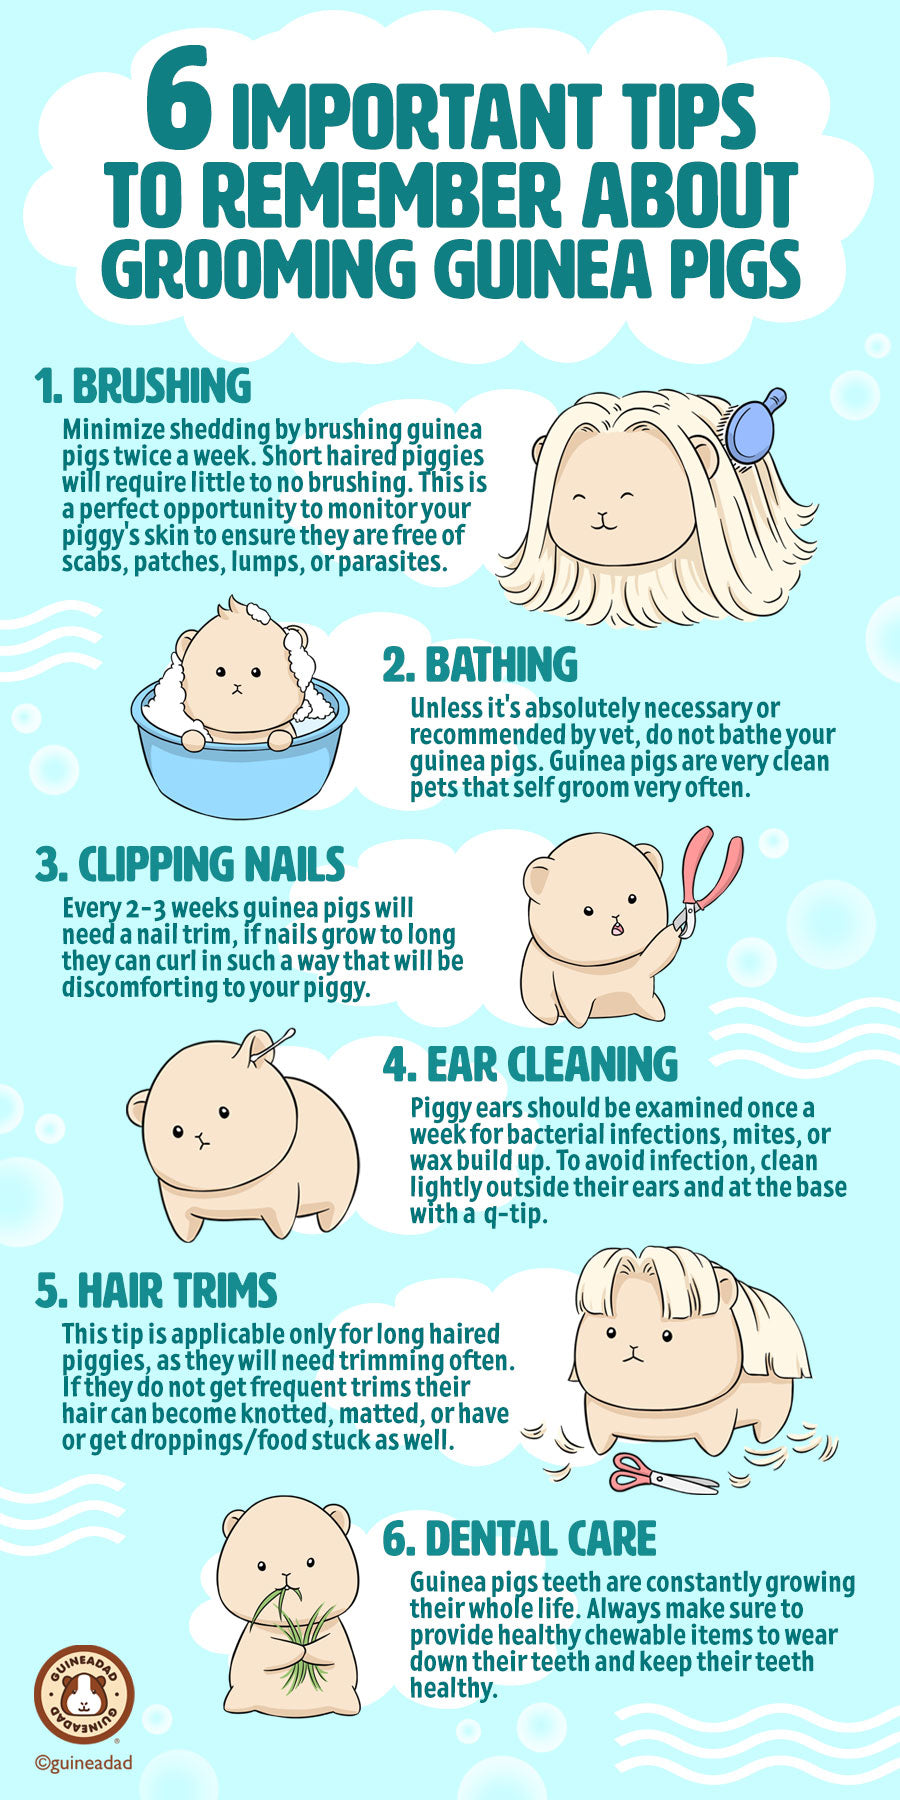 6 Tips to Grooming Guinea Pigs